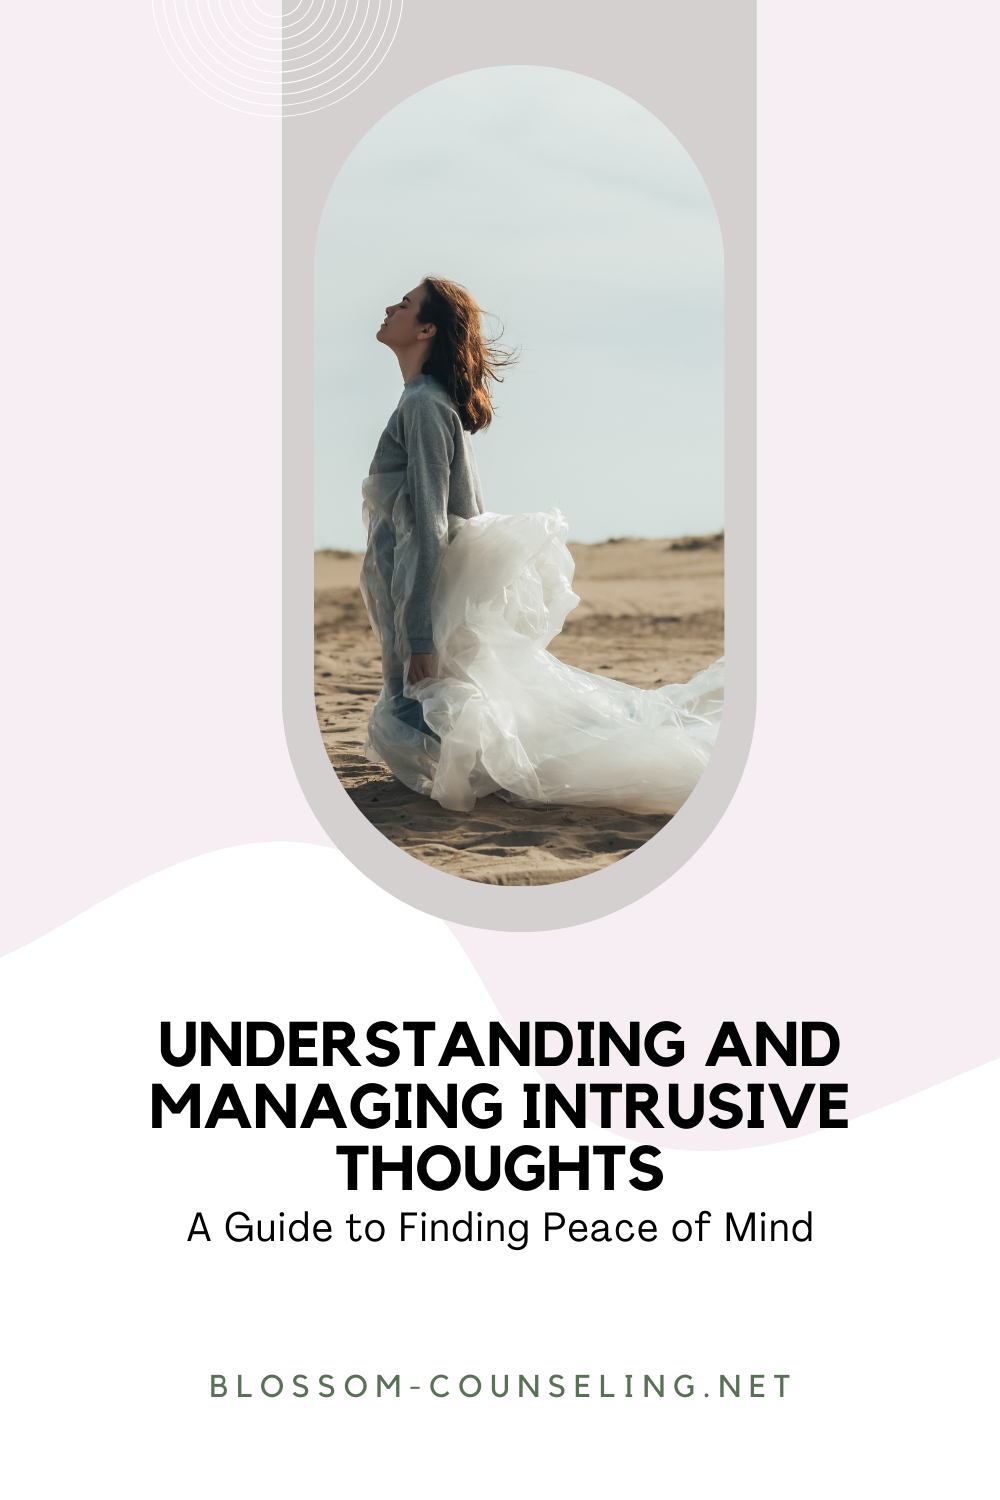 Understanding and Managing Intrusive Thoughts: A Guide to Finding Peace of Mind